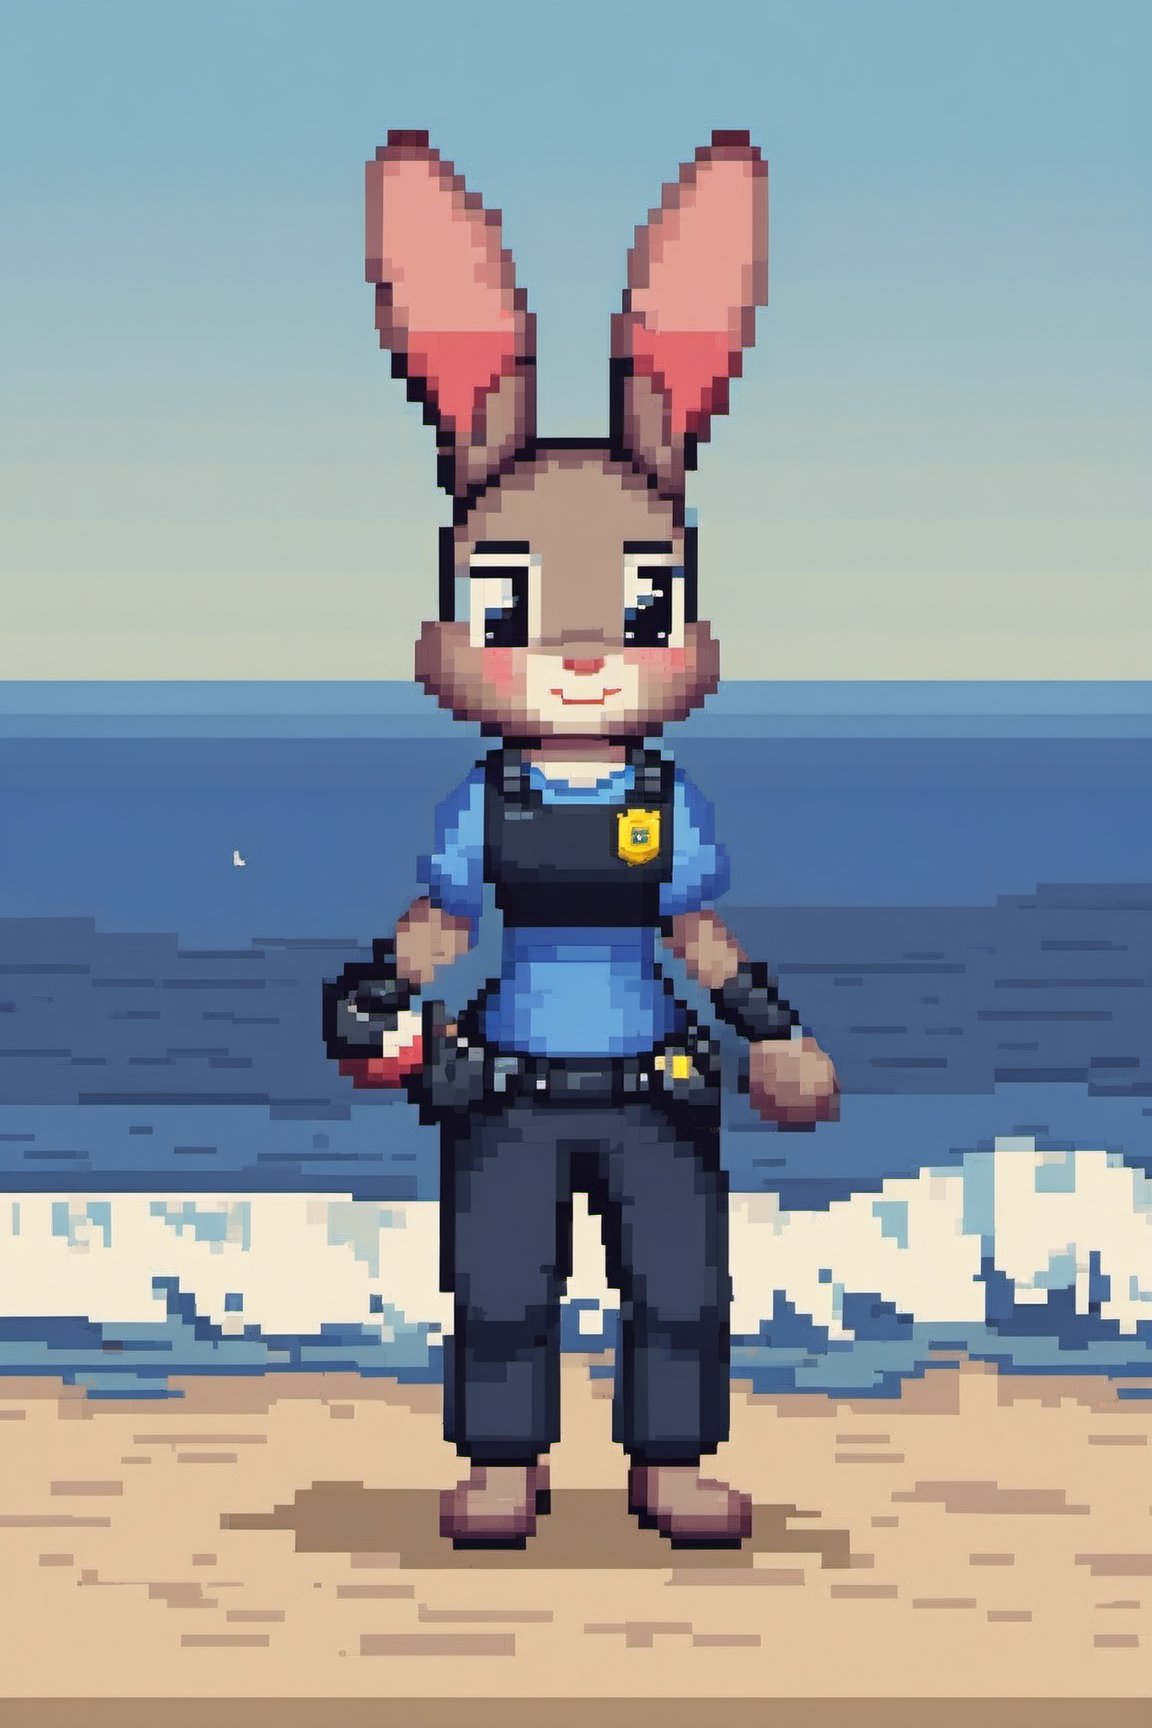 Full body pixel style image of jxdhxps character, police outfit, pixel style, background of a beach